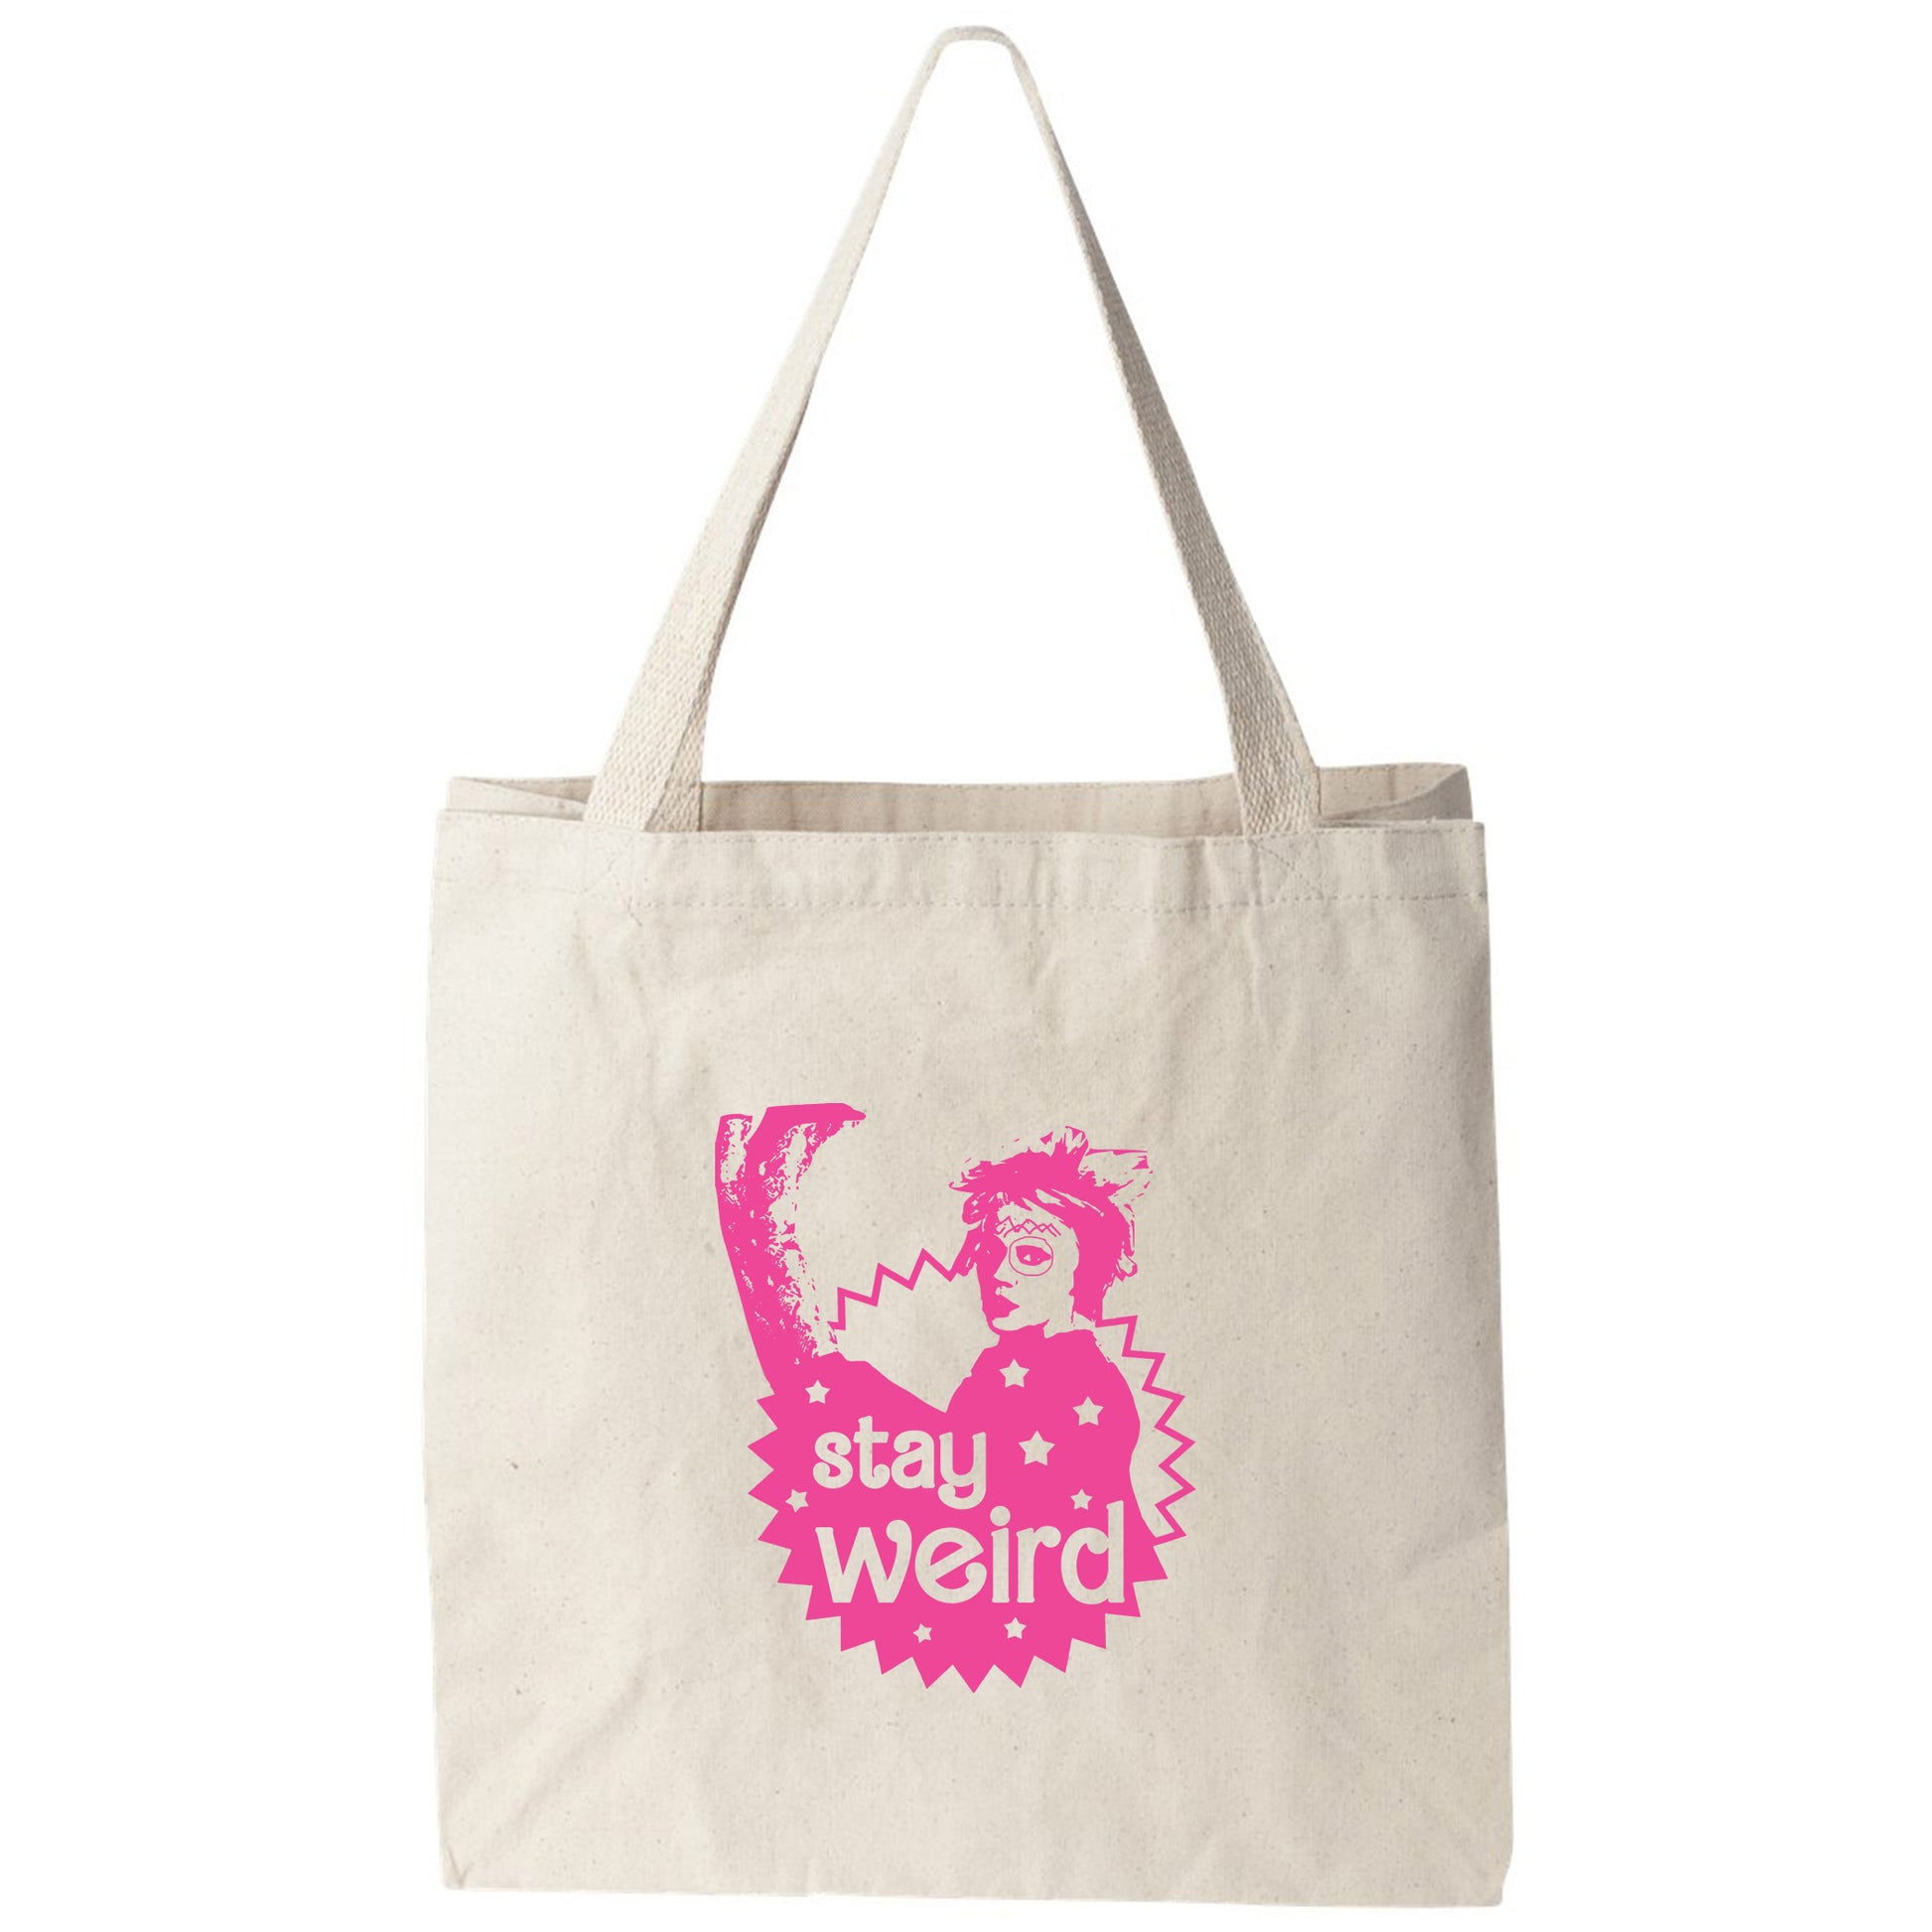 a pink tote bag with a woman's face on it